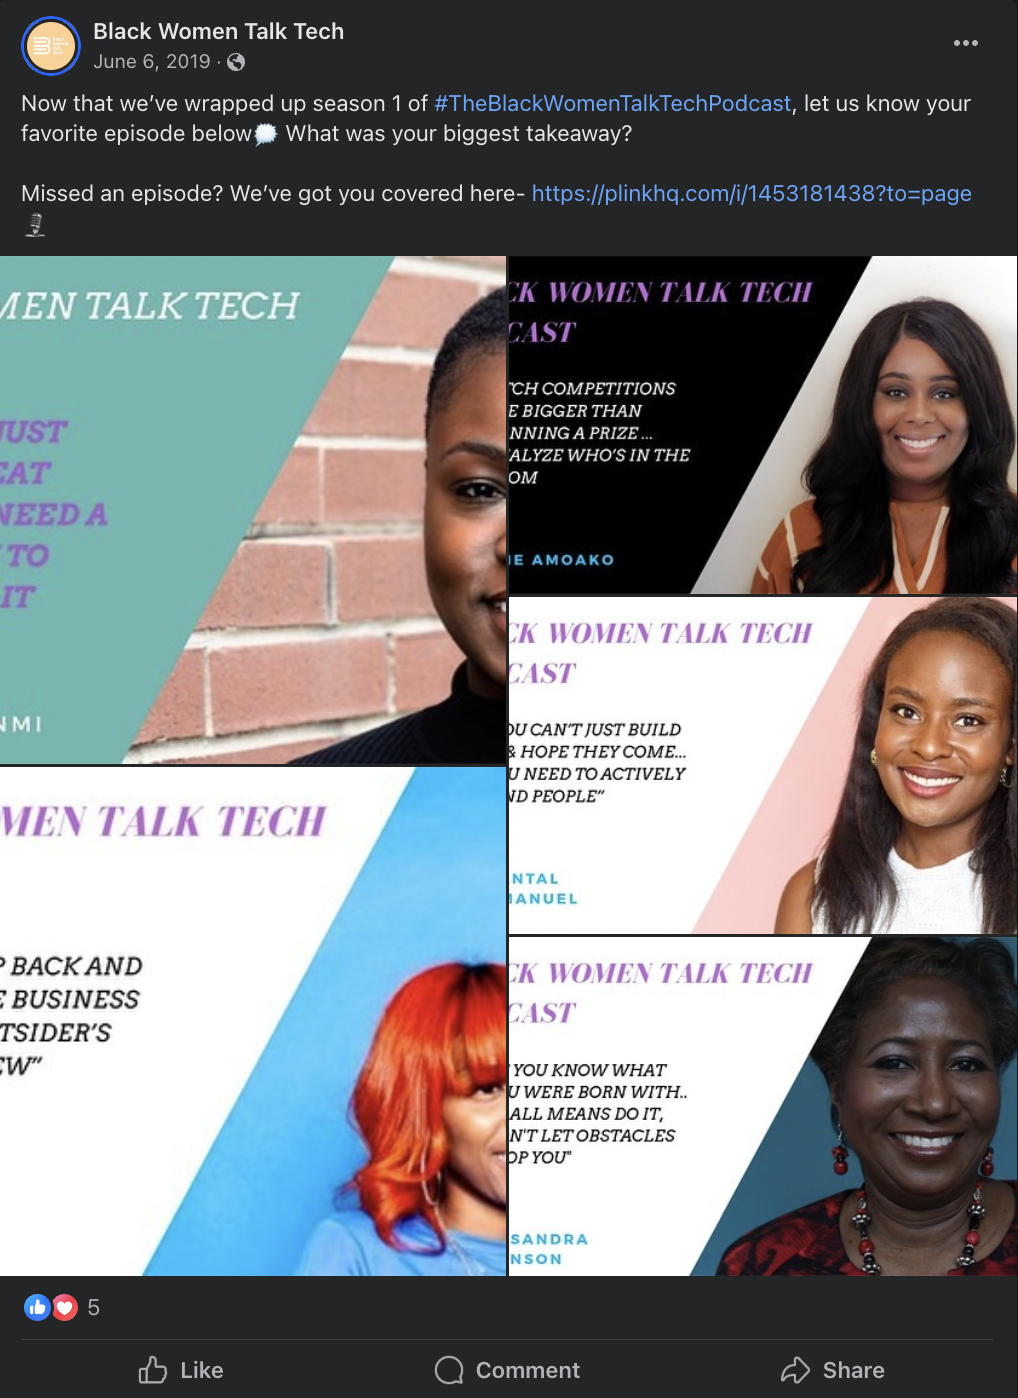 Black Women Talk Tech podcast shared to facebook Plink podcast link example 2019